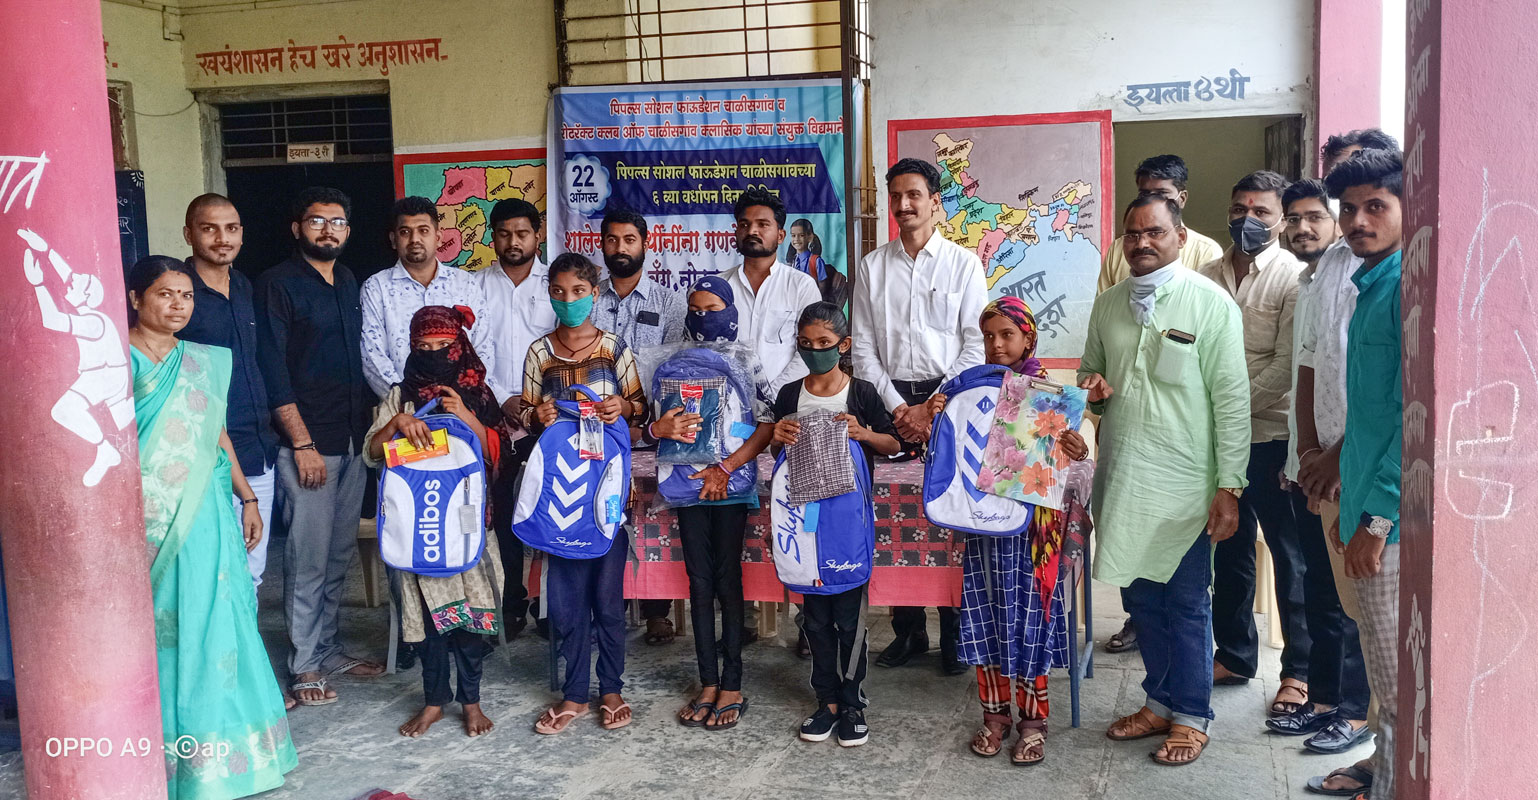 Stationery kits being provided to school children by the members of RAC Chalisgaon Classic.